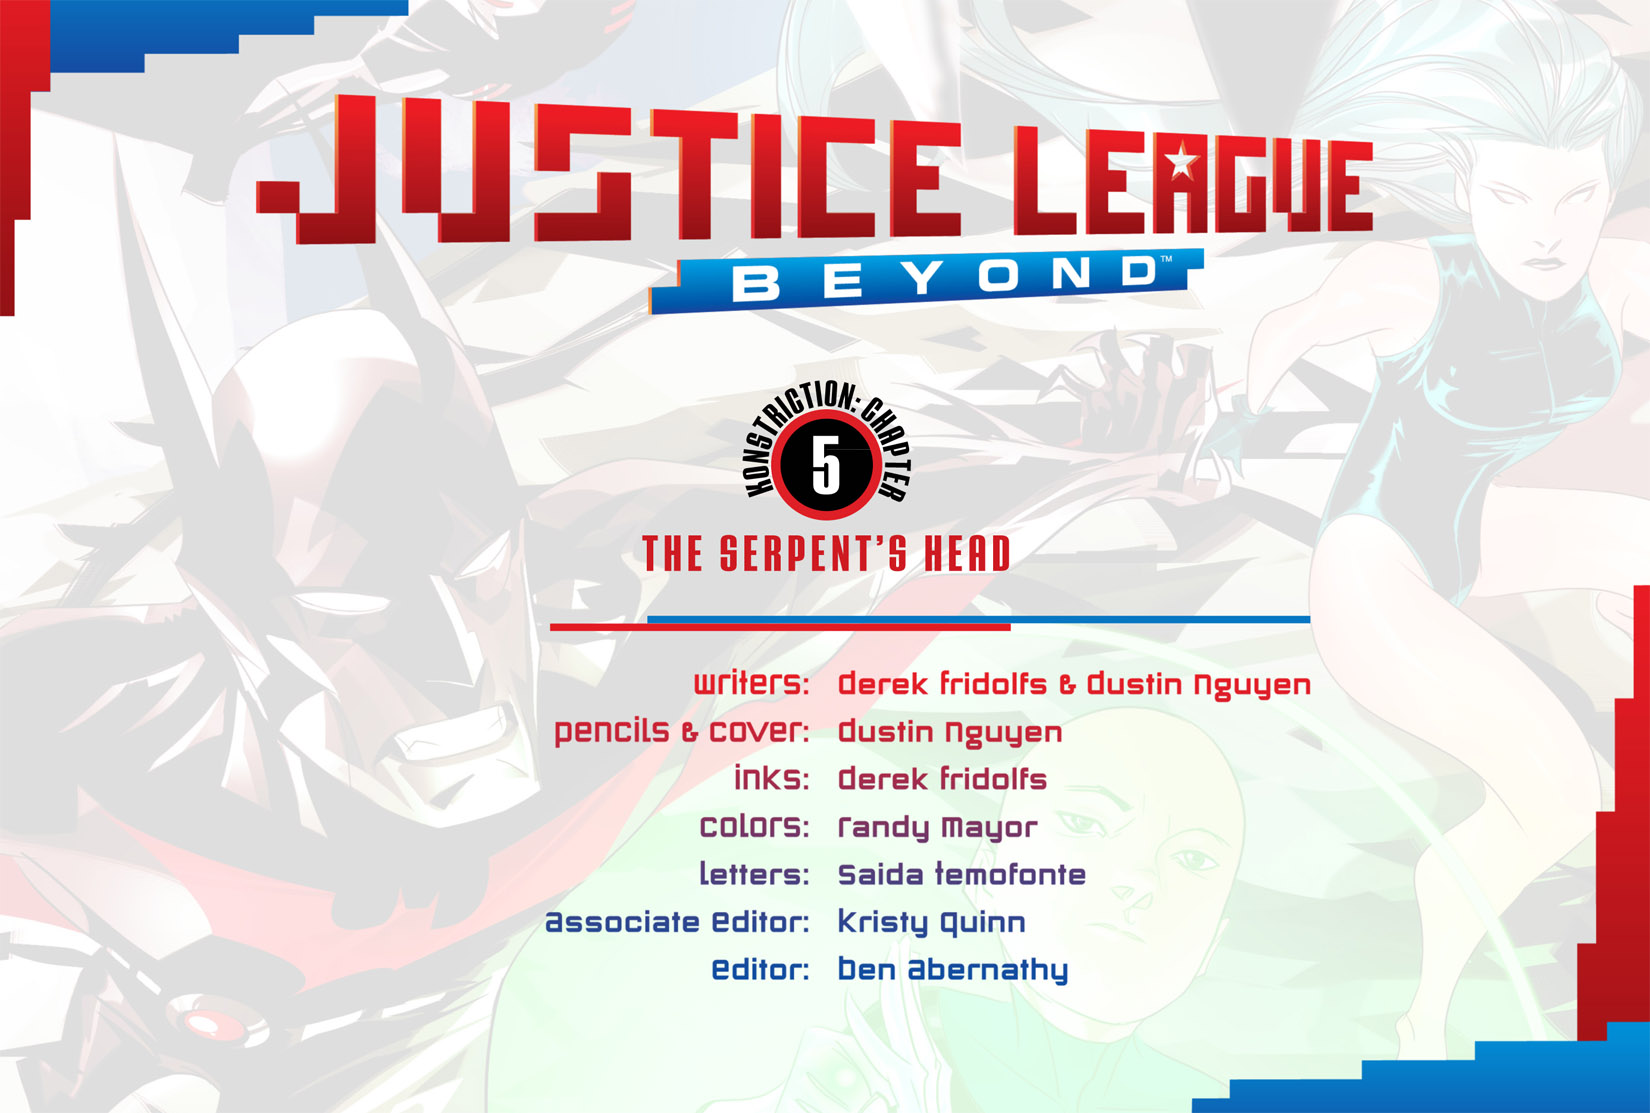 Read online Justice League Beyond comic -  Issue #5 - 2